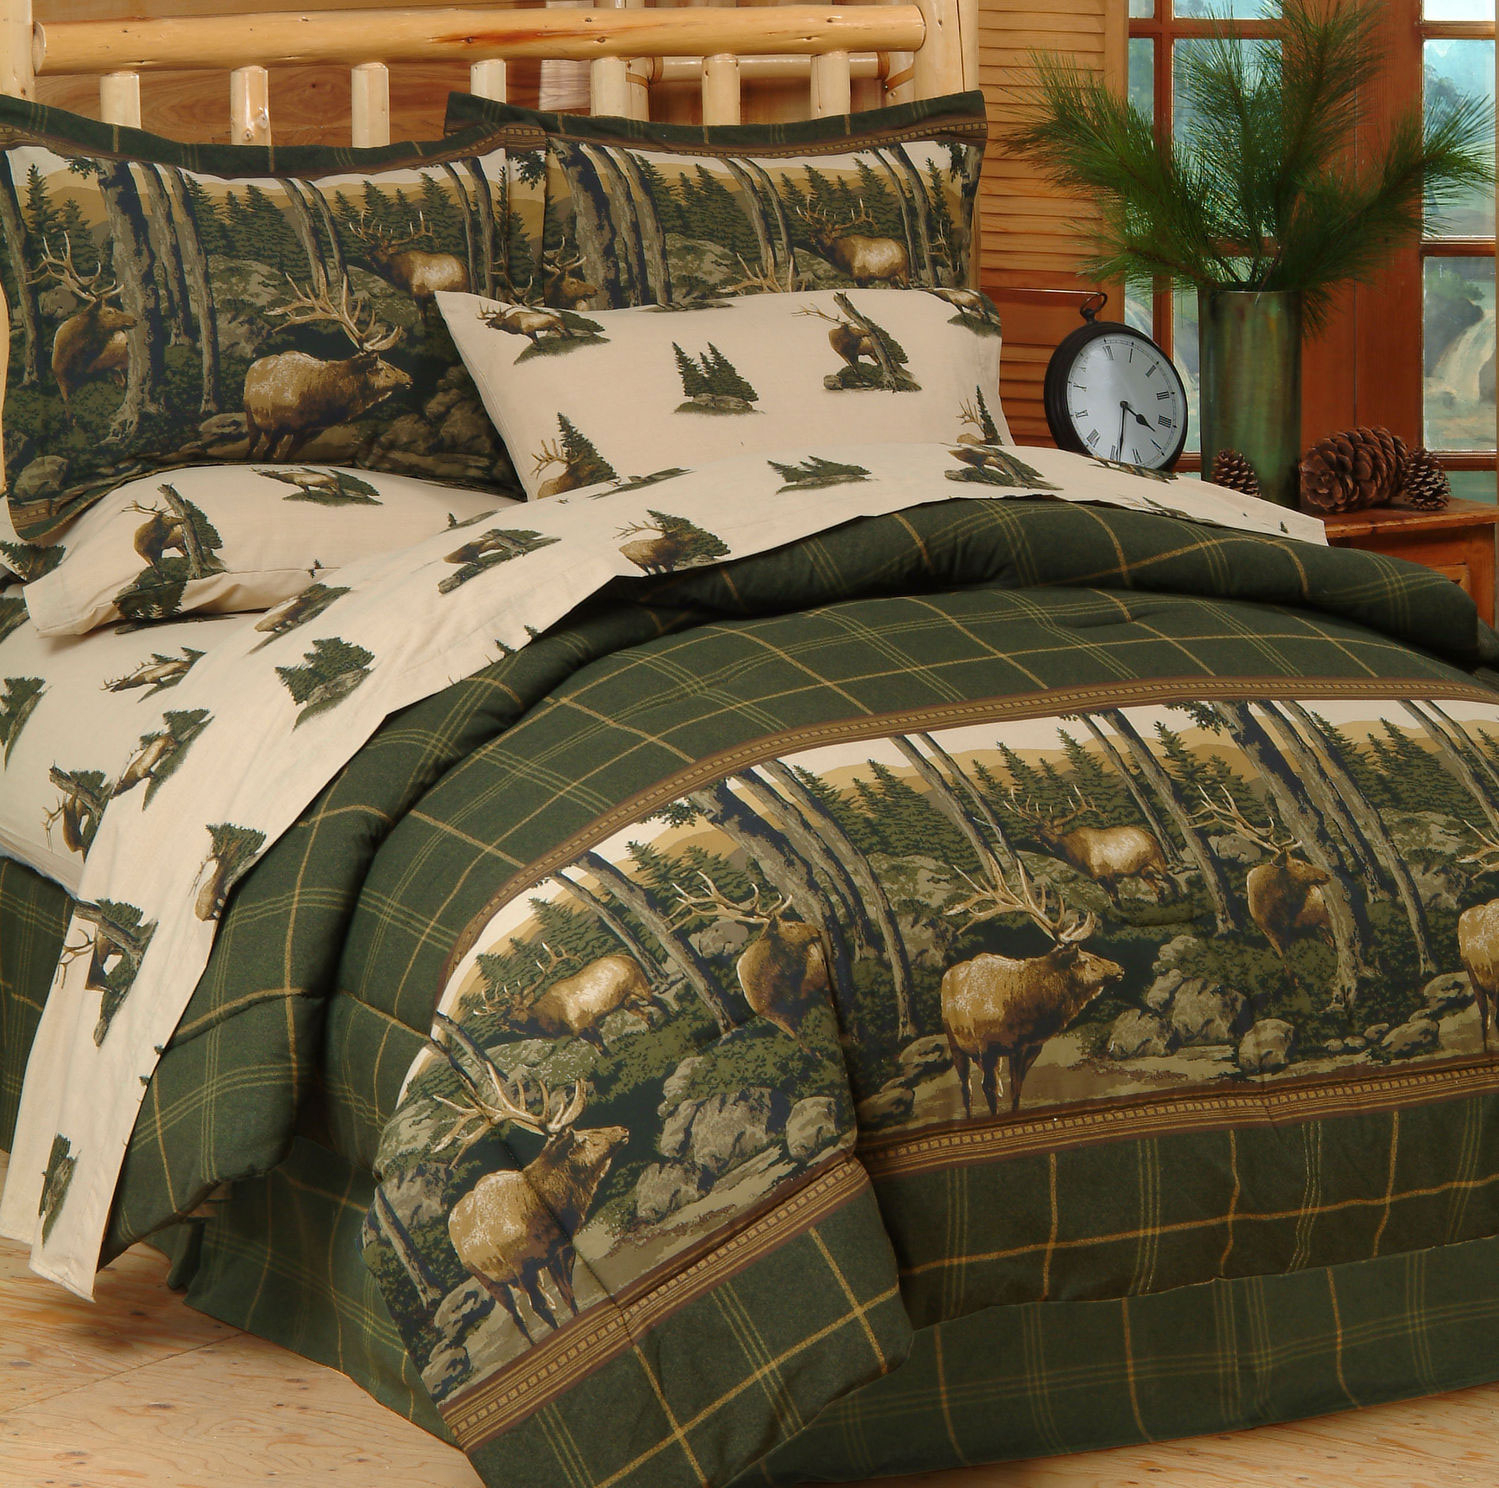 WHITETAIL DEER Buck HUNTING Lodge Cabin Plaid COMFORTER SET+SHEETS Bed~in~a Bag 